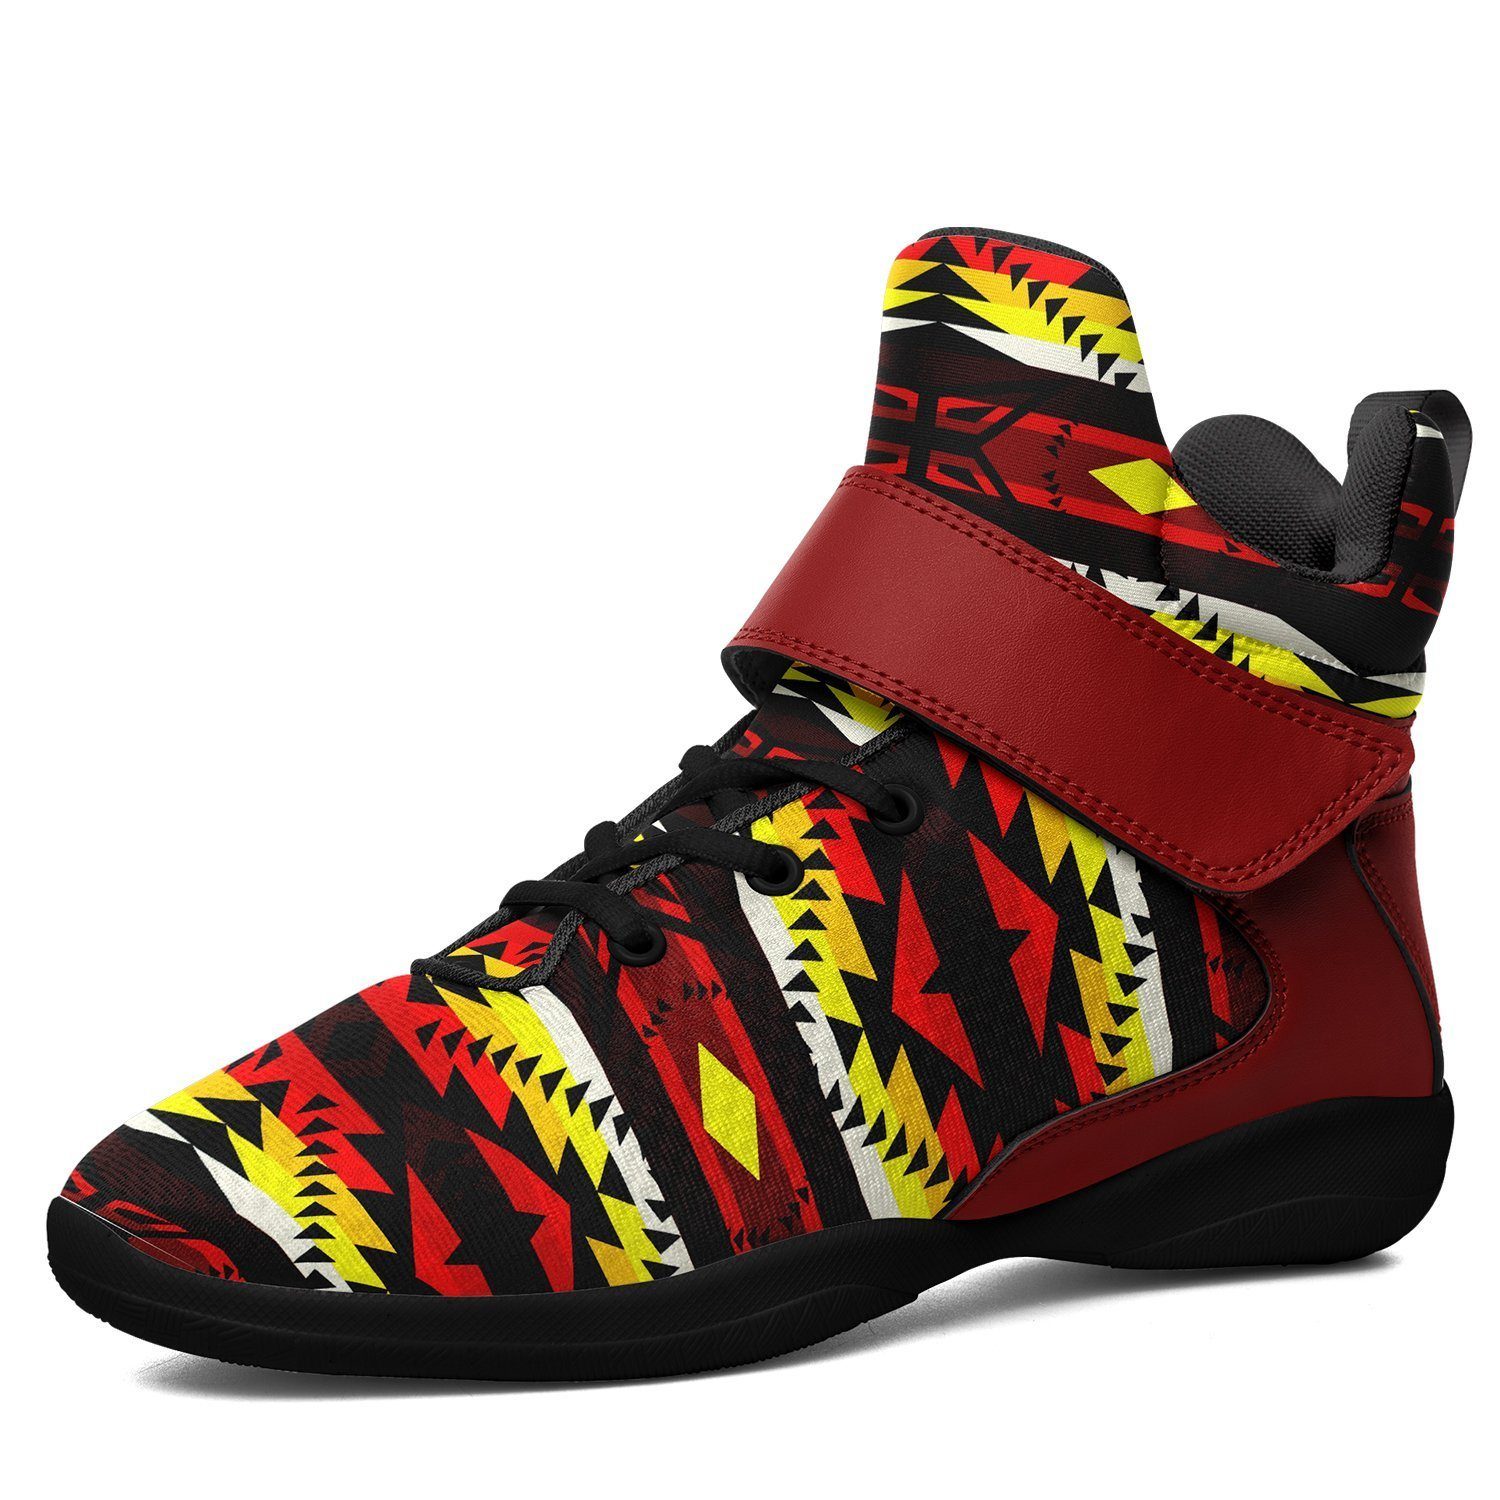 Canyon War Party Ipottaa Basketball / Sport High Top Shoes - Black Sole 49 Dzine US Men 7 / EUR 40 Black Sole with Dark Red Strap 